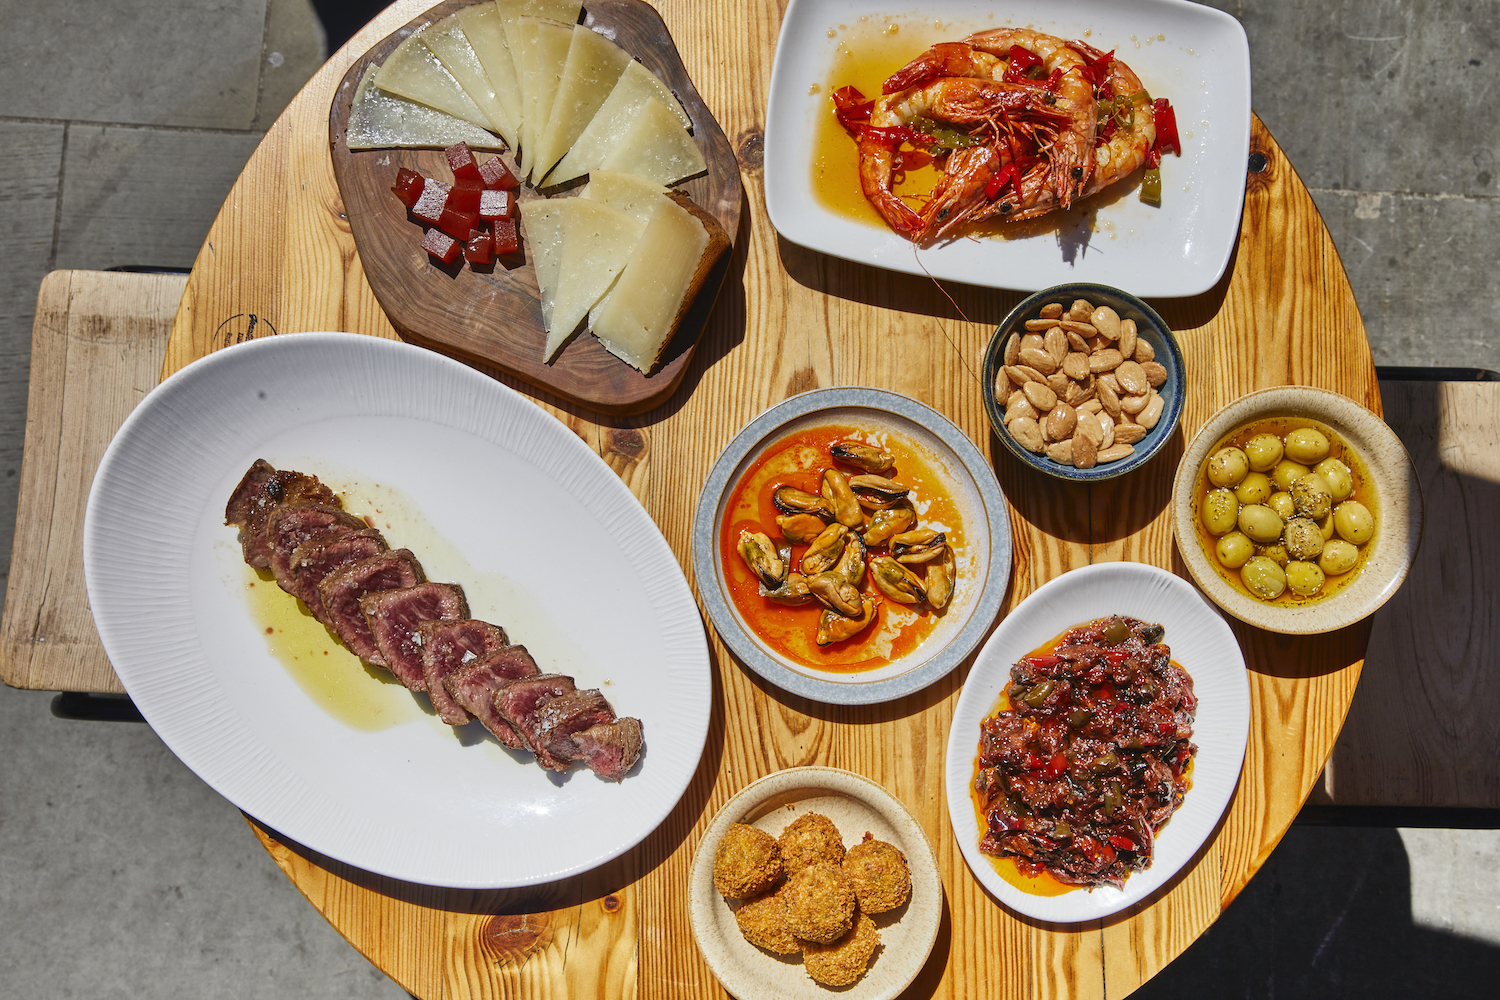 A table of José Pizarro’s Spanish classics, including Ibérico presa with flaky salt; red prawns in chilli and garlic; croquetas; olives; cheese; and escalivada